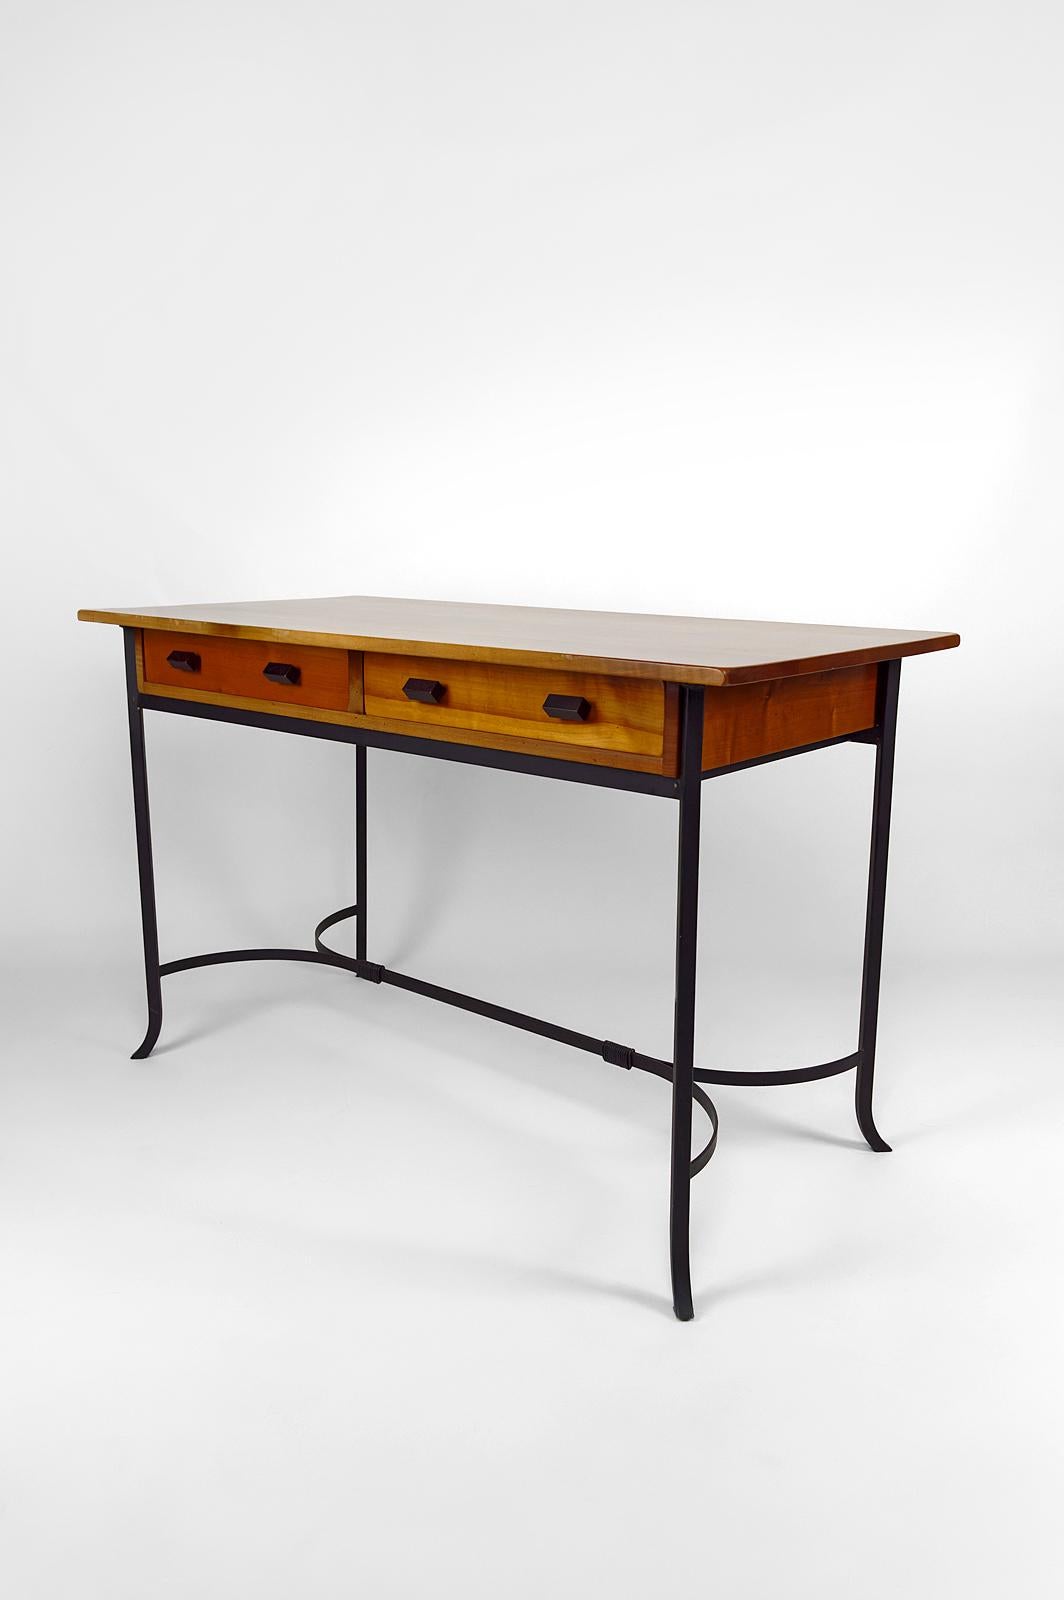 Late 20th Century Modernist Desk in Cherry Wood and Wrought Iron, circa 1980